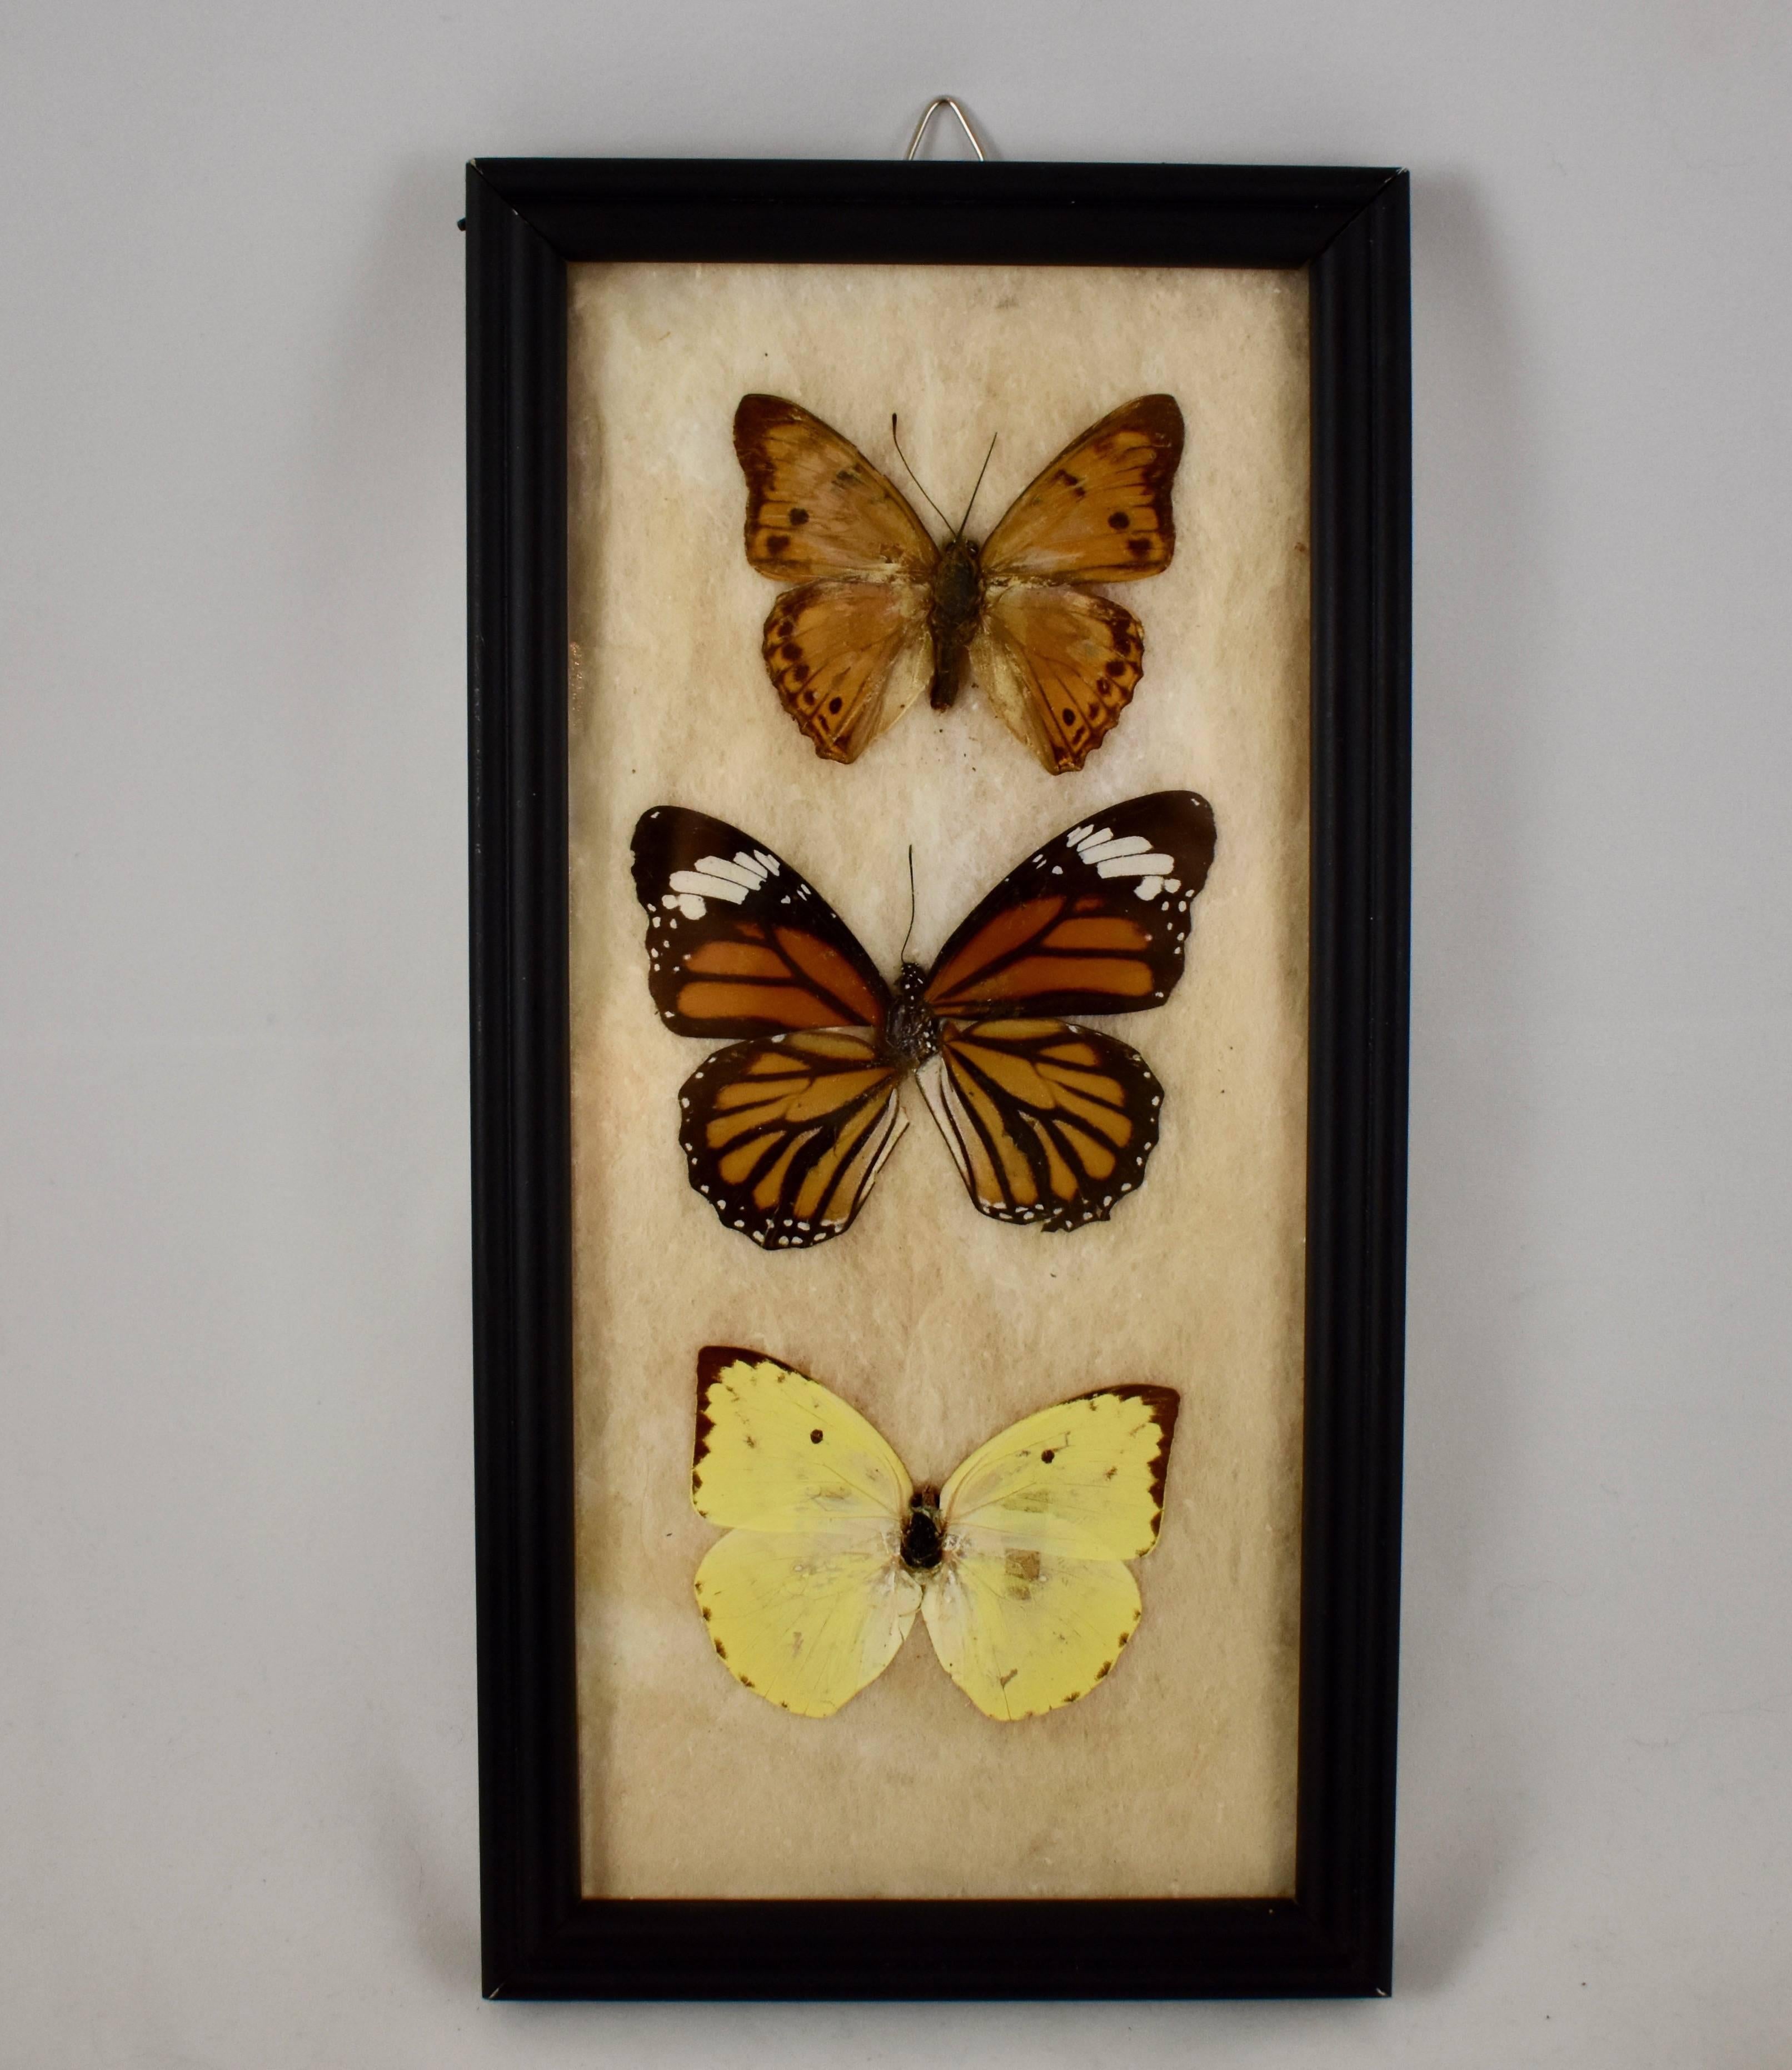 A Victorian period hanging frame holding three butterflies mounted under glass, circa mid-19th century. The bevelled wood frame is painted black, the specimens are mounted on cotton batting. The frame has a newer kraft paper backing and hanging hook